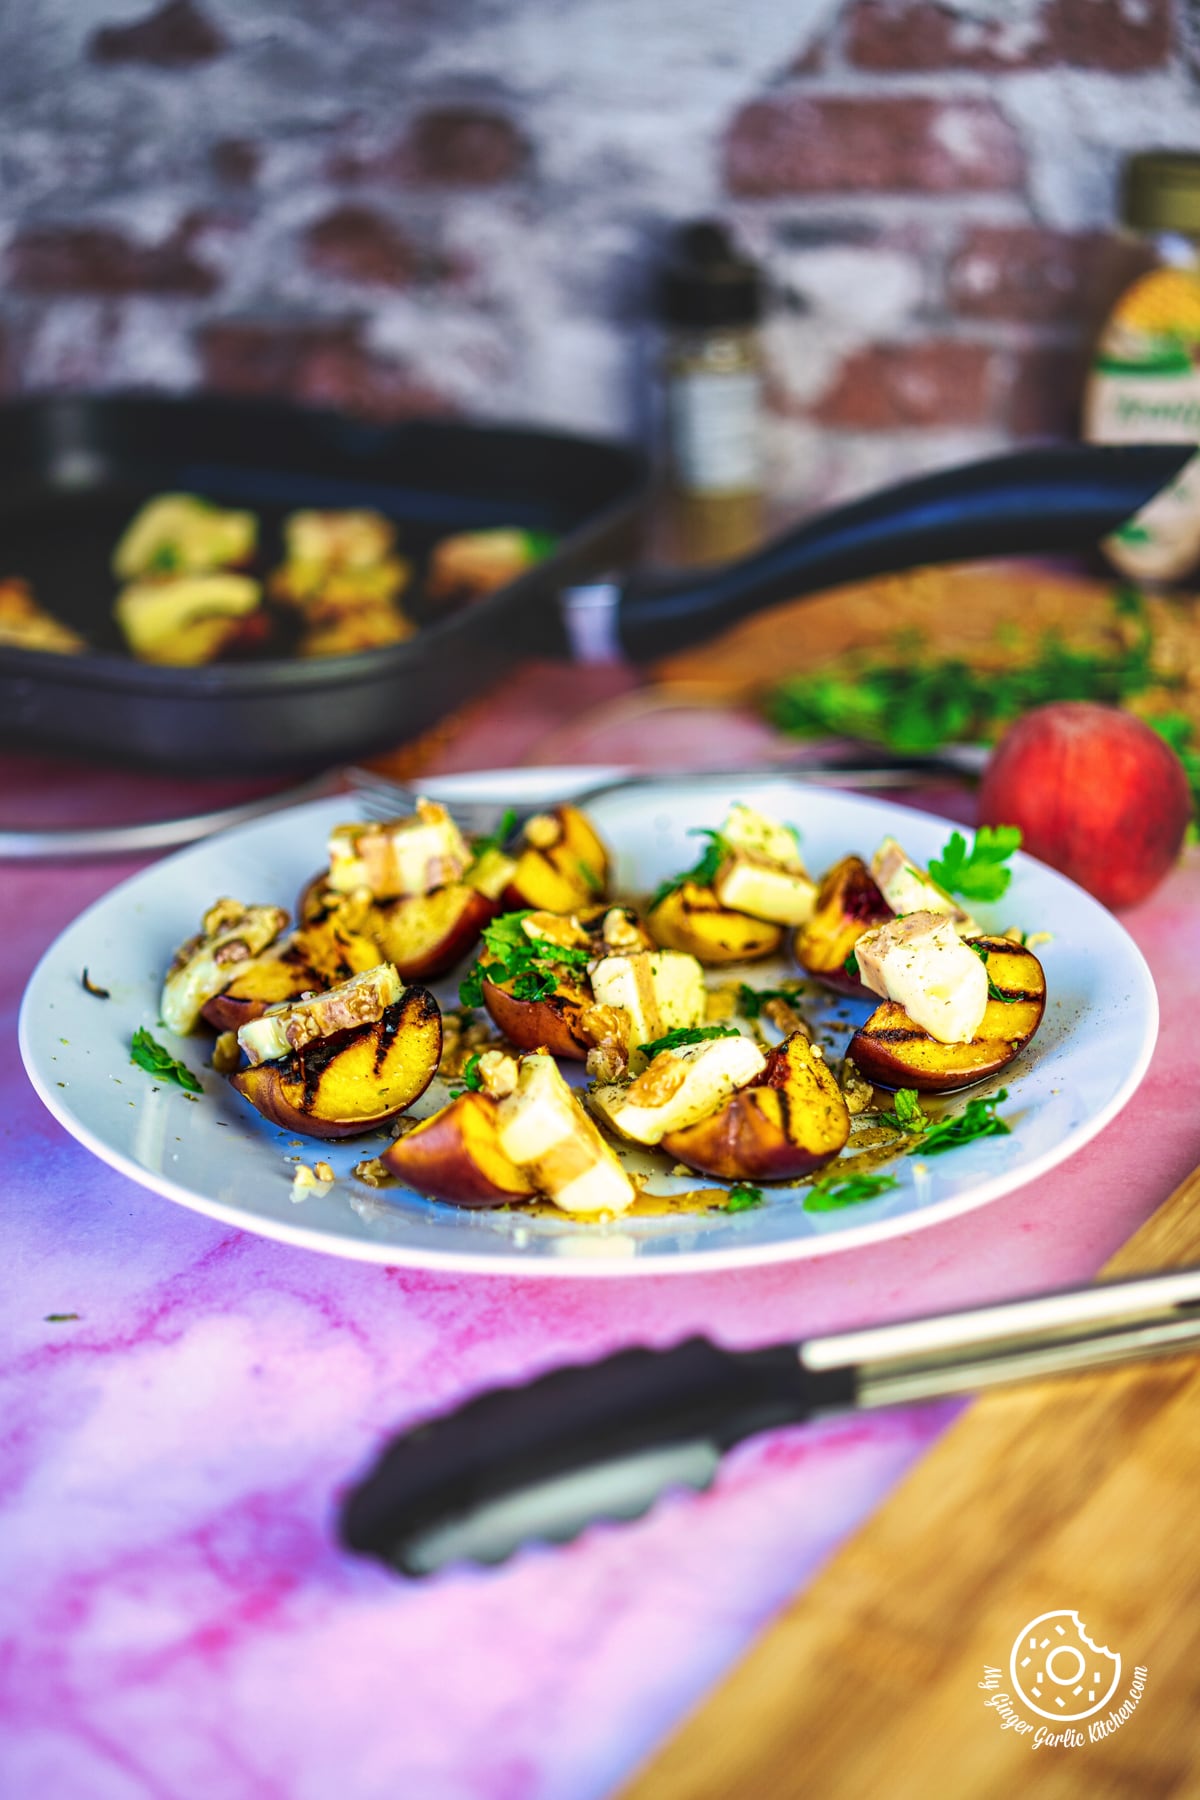 Image of Grilled Peaches with Cheese and Honey